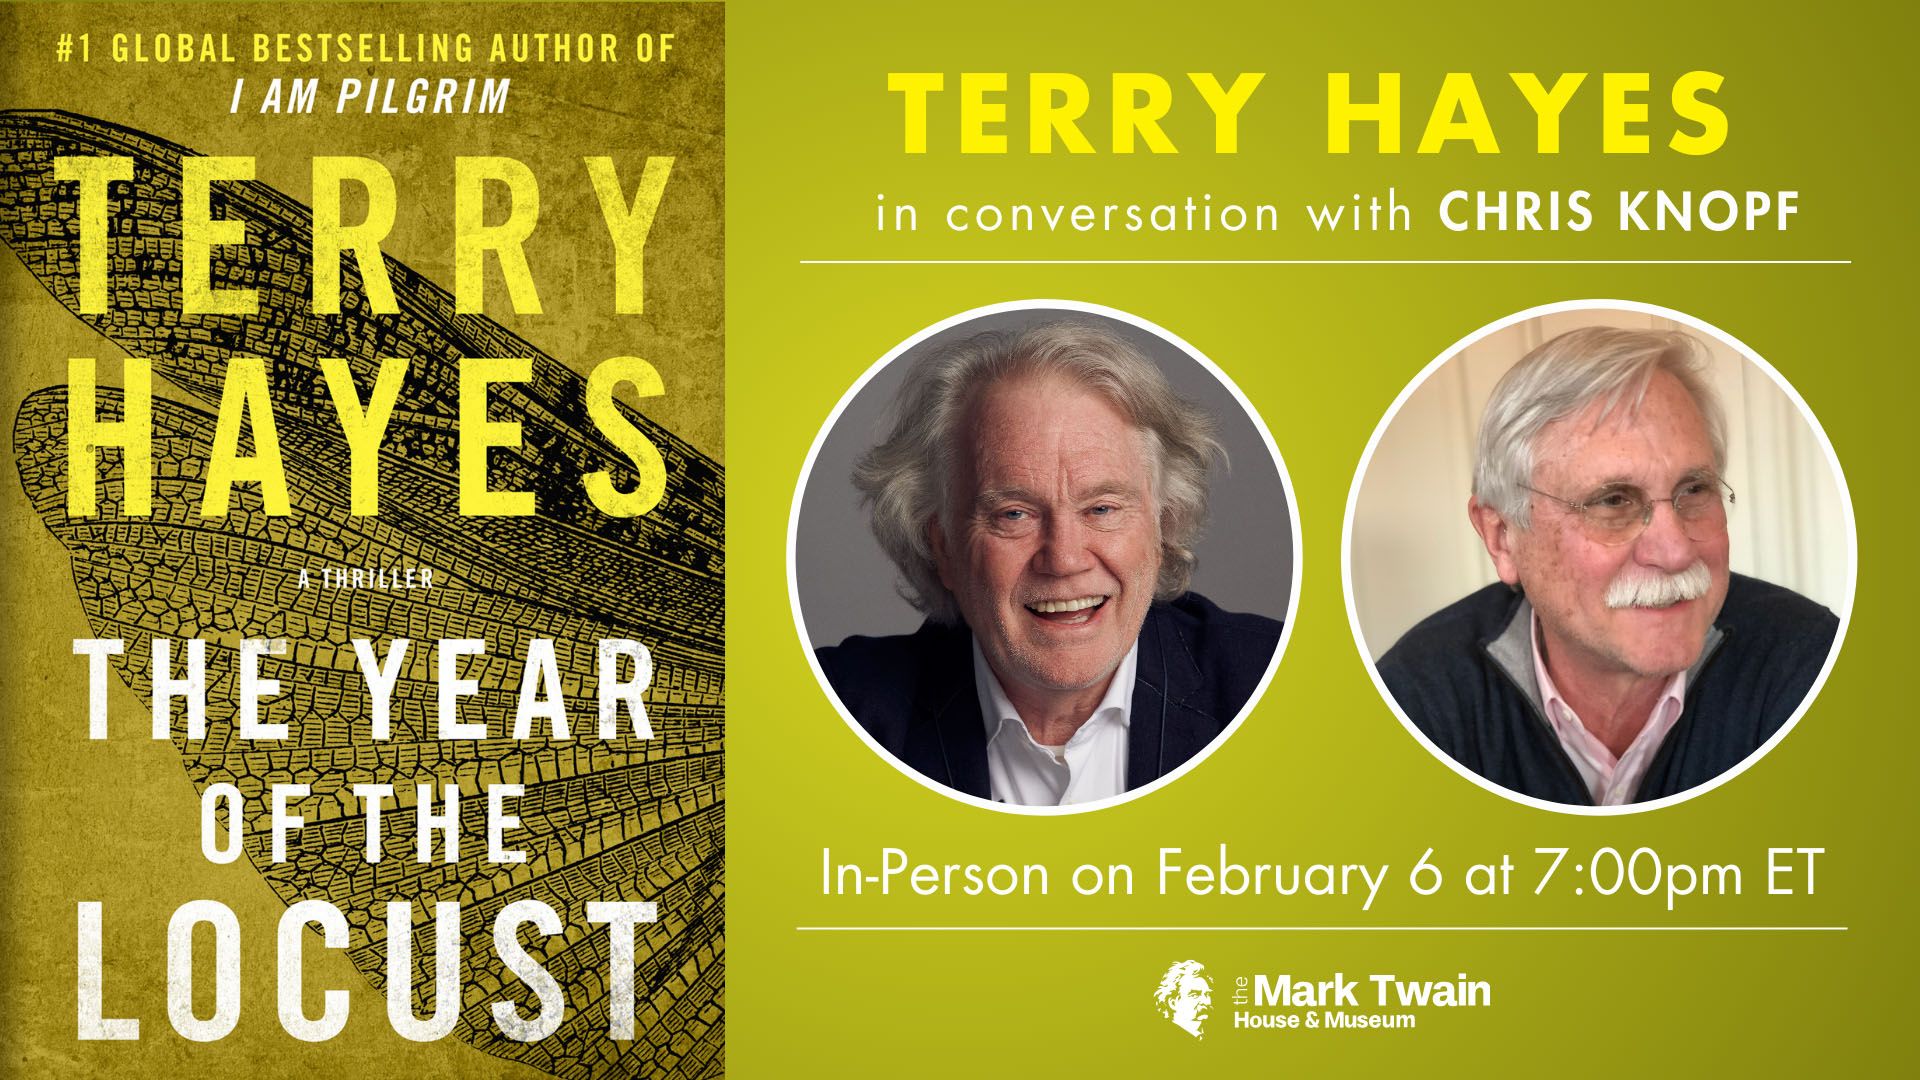 THE YEAR OF THE LOCUST with Terry Hayes (In-Person) - Mark Twain House